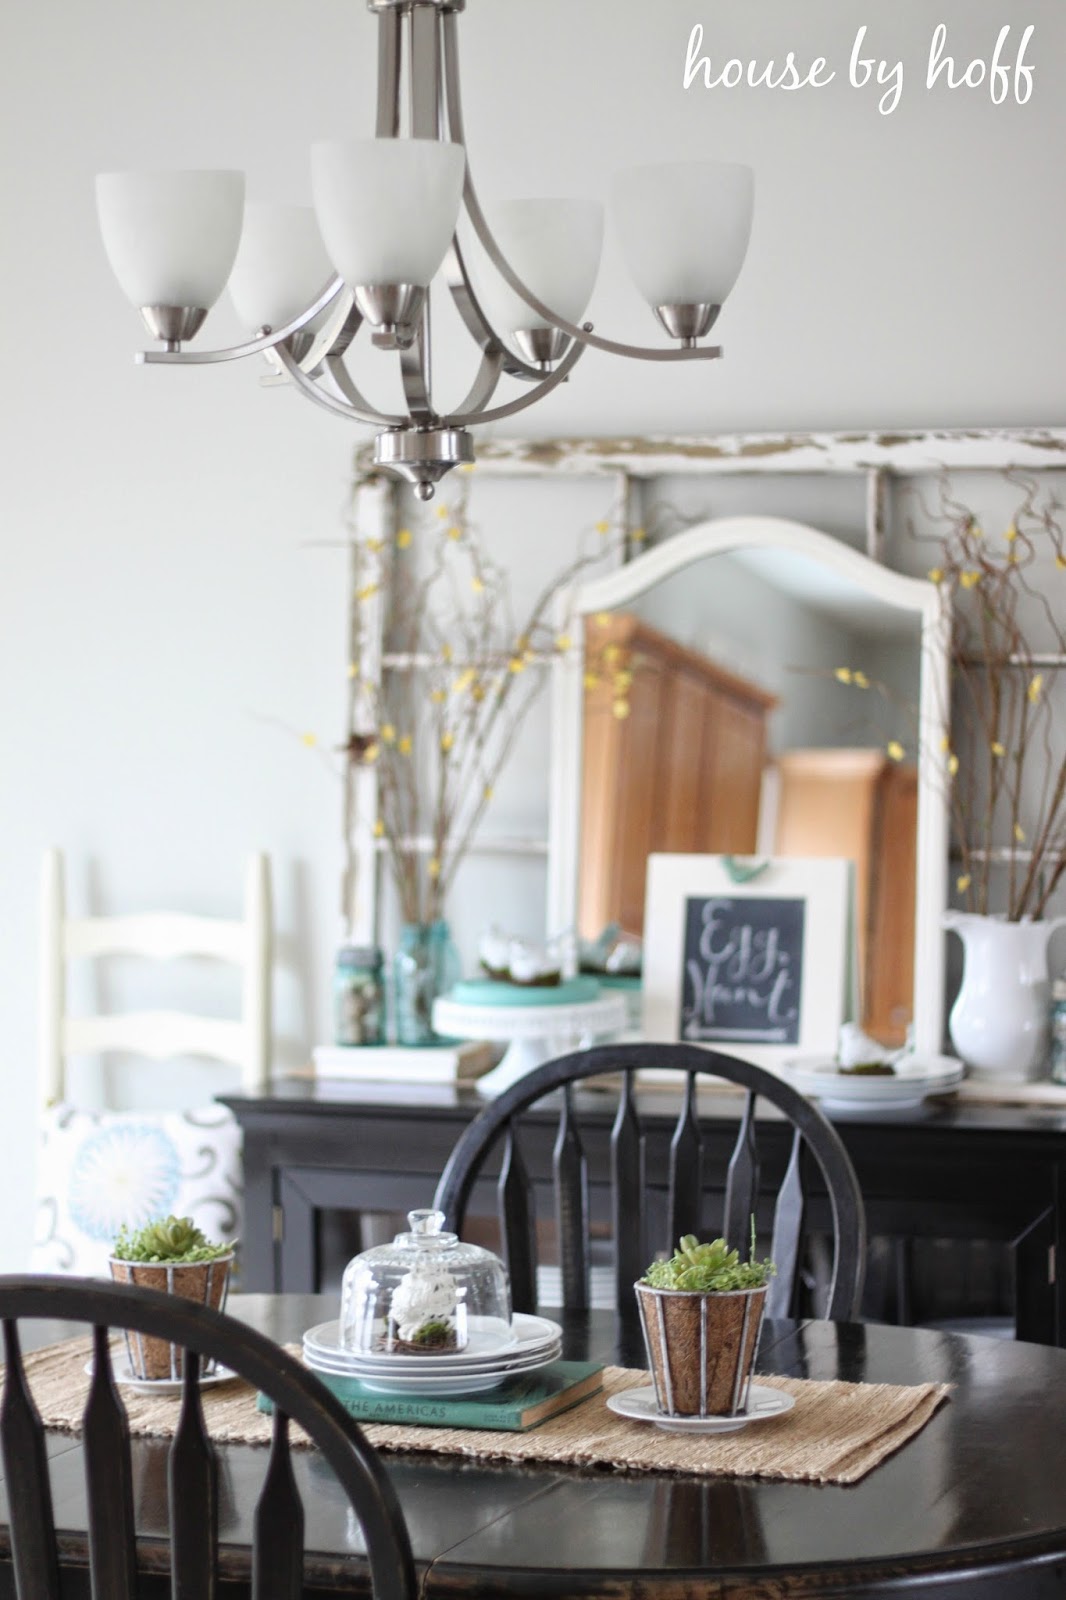 Decorating for Spring on the CHEAP + A Spring Giveaway - House by Hoff